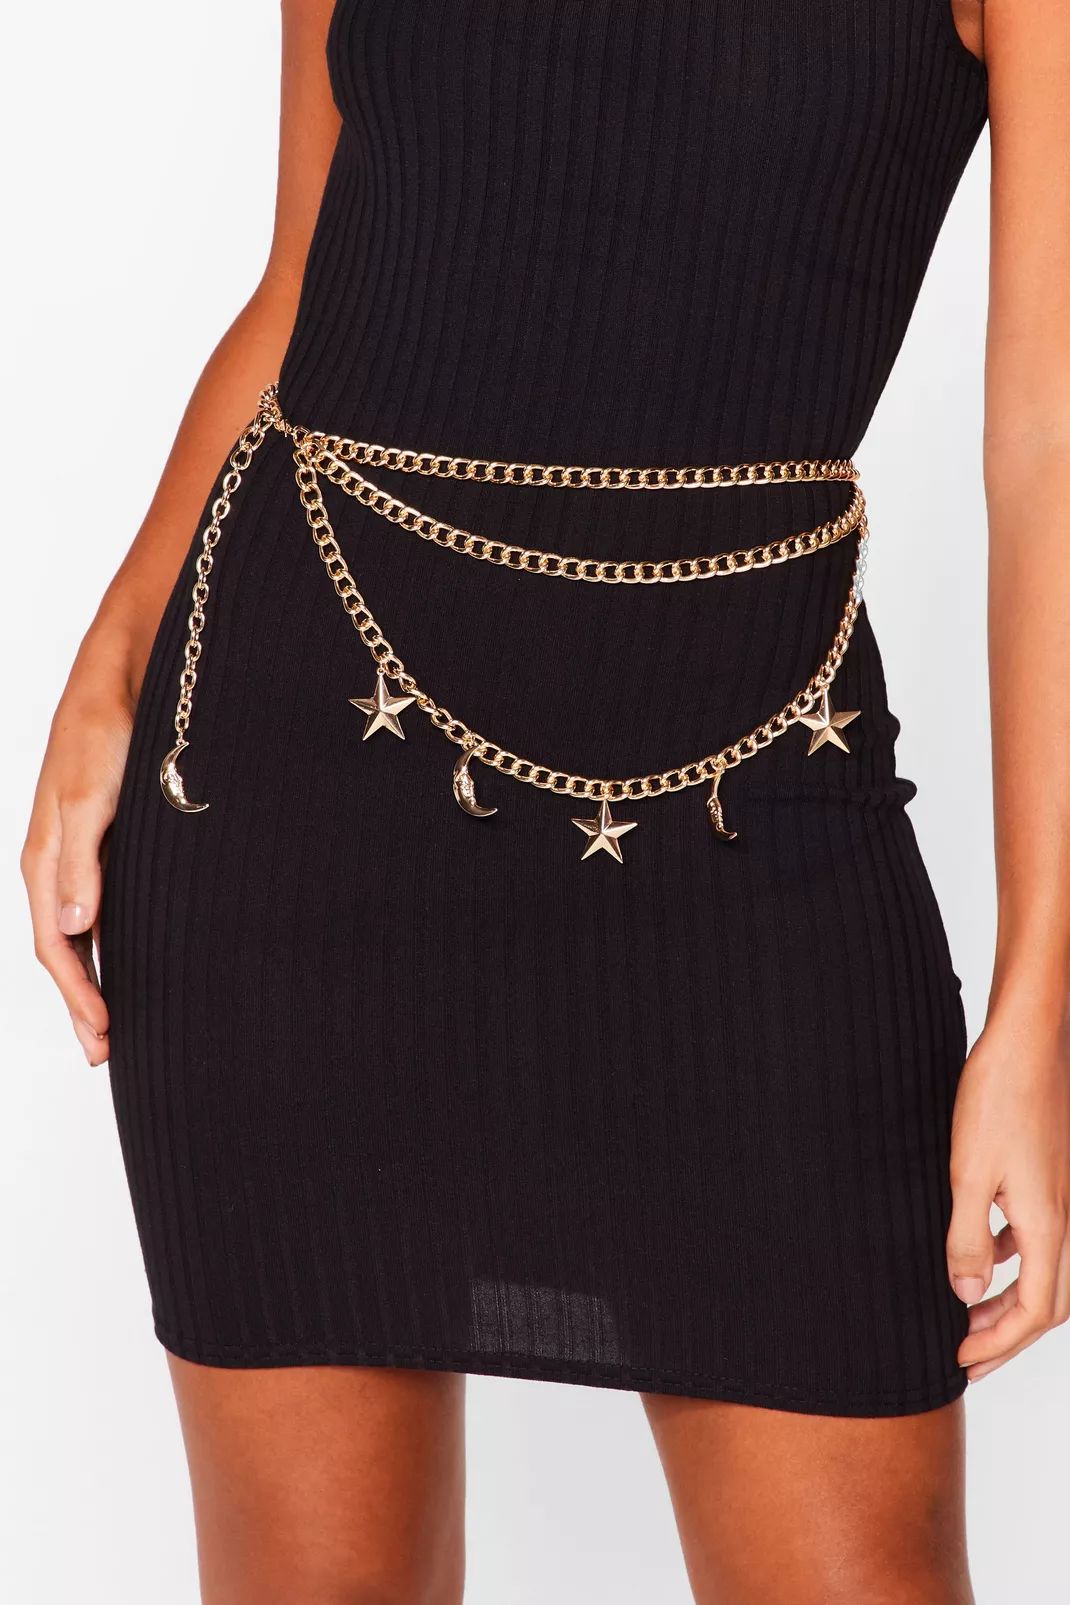 Recycled Metal Moon and Star Chain Belt | Nasty Gal (US)